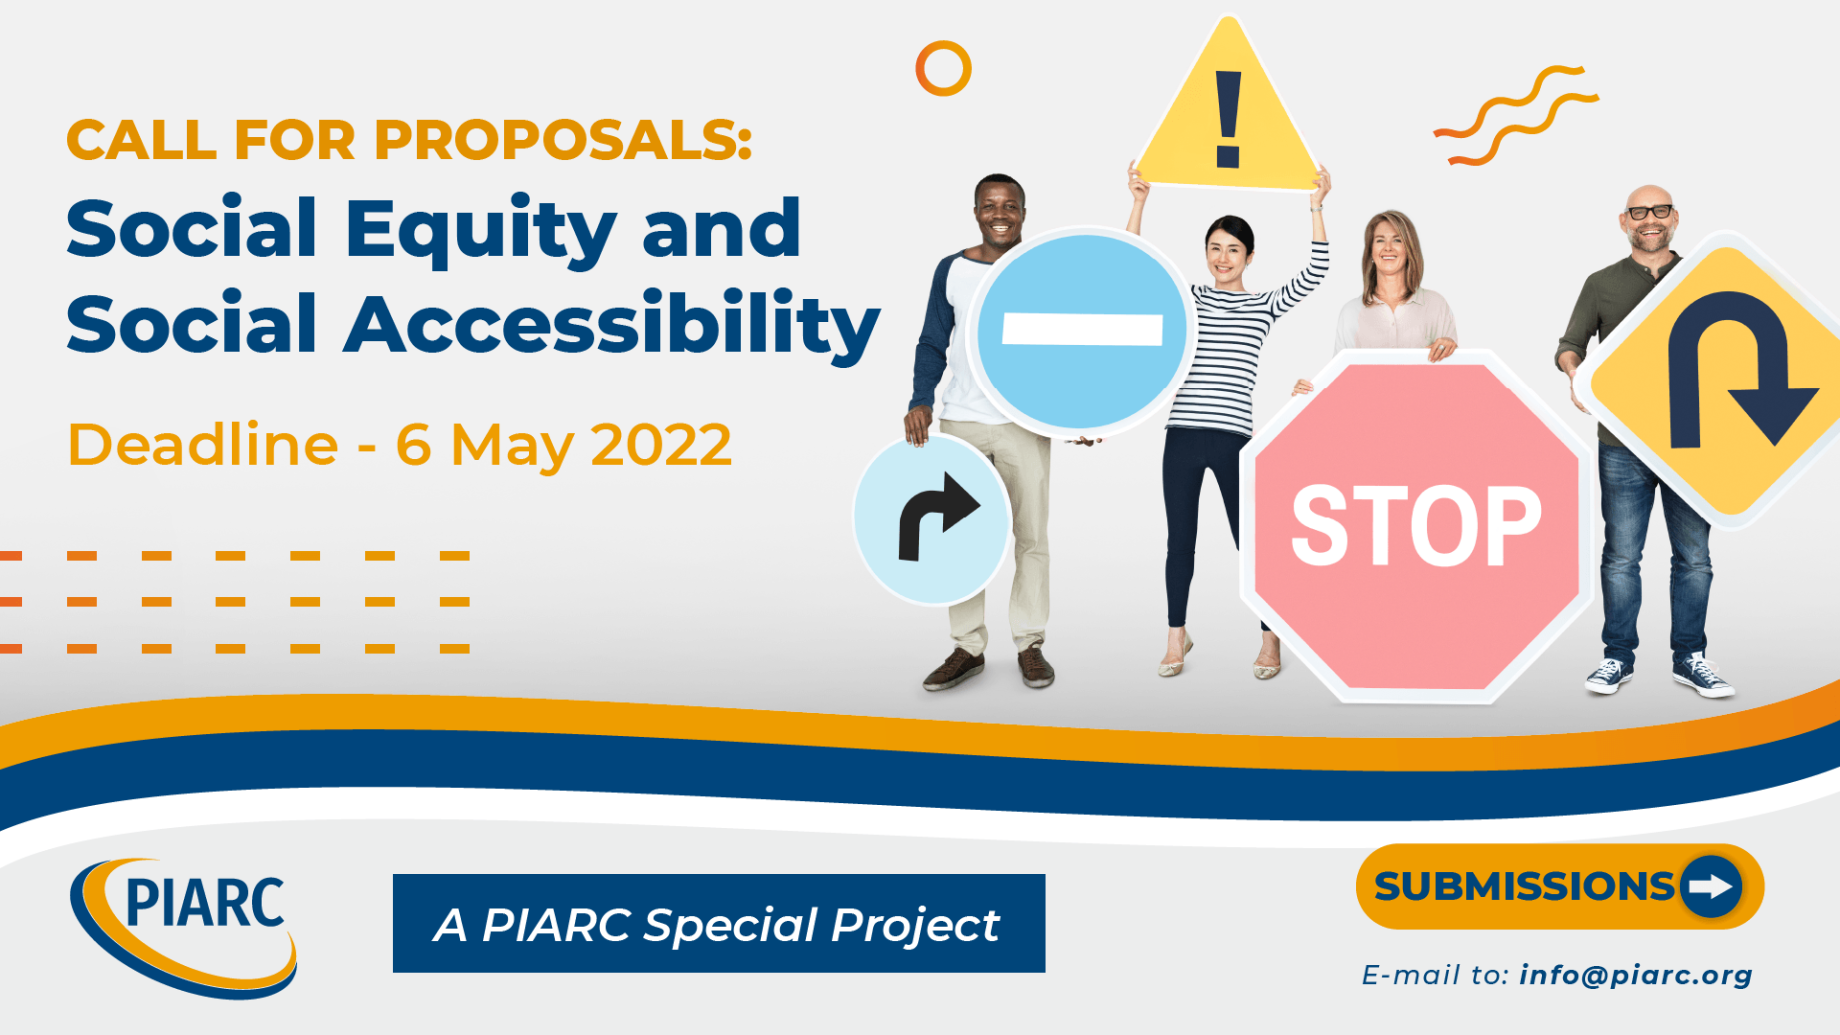 New Call for Proposals to conduct the “Social
equity and social accessibility” PIARC Special Project!